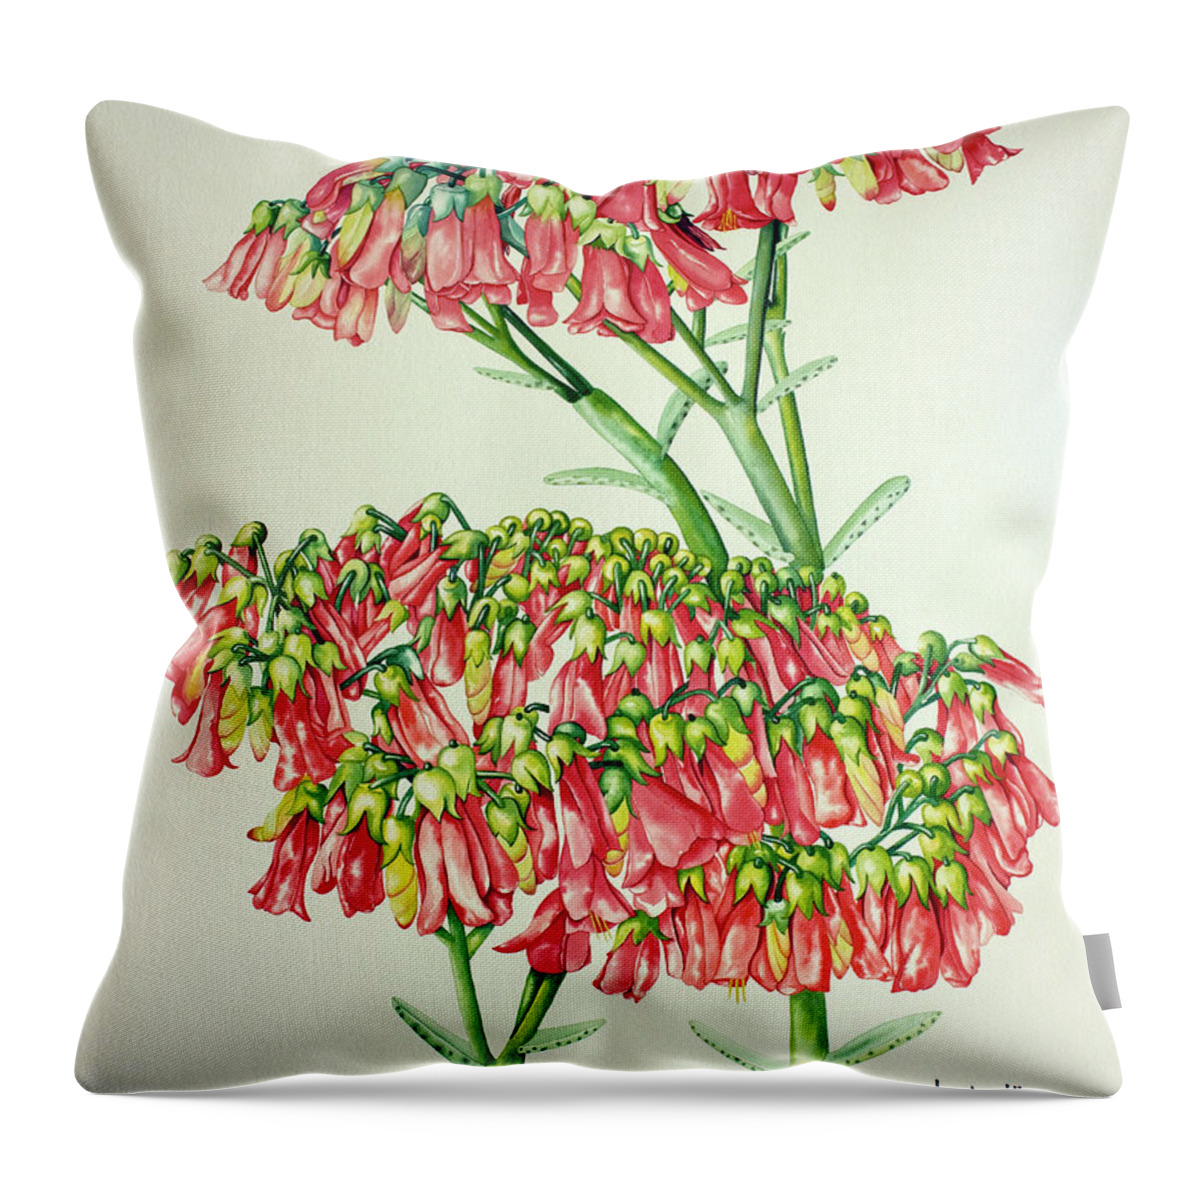 Cactus Throw Pillow featuring the painting Cactus Flower 3 by Kandyce Waltensperger